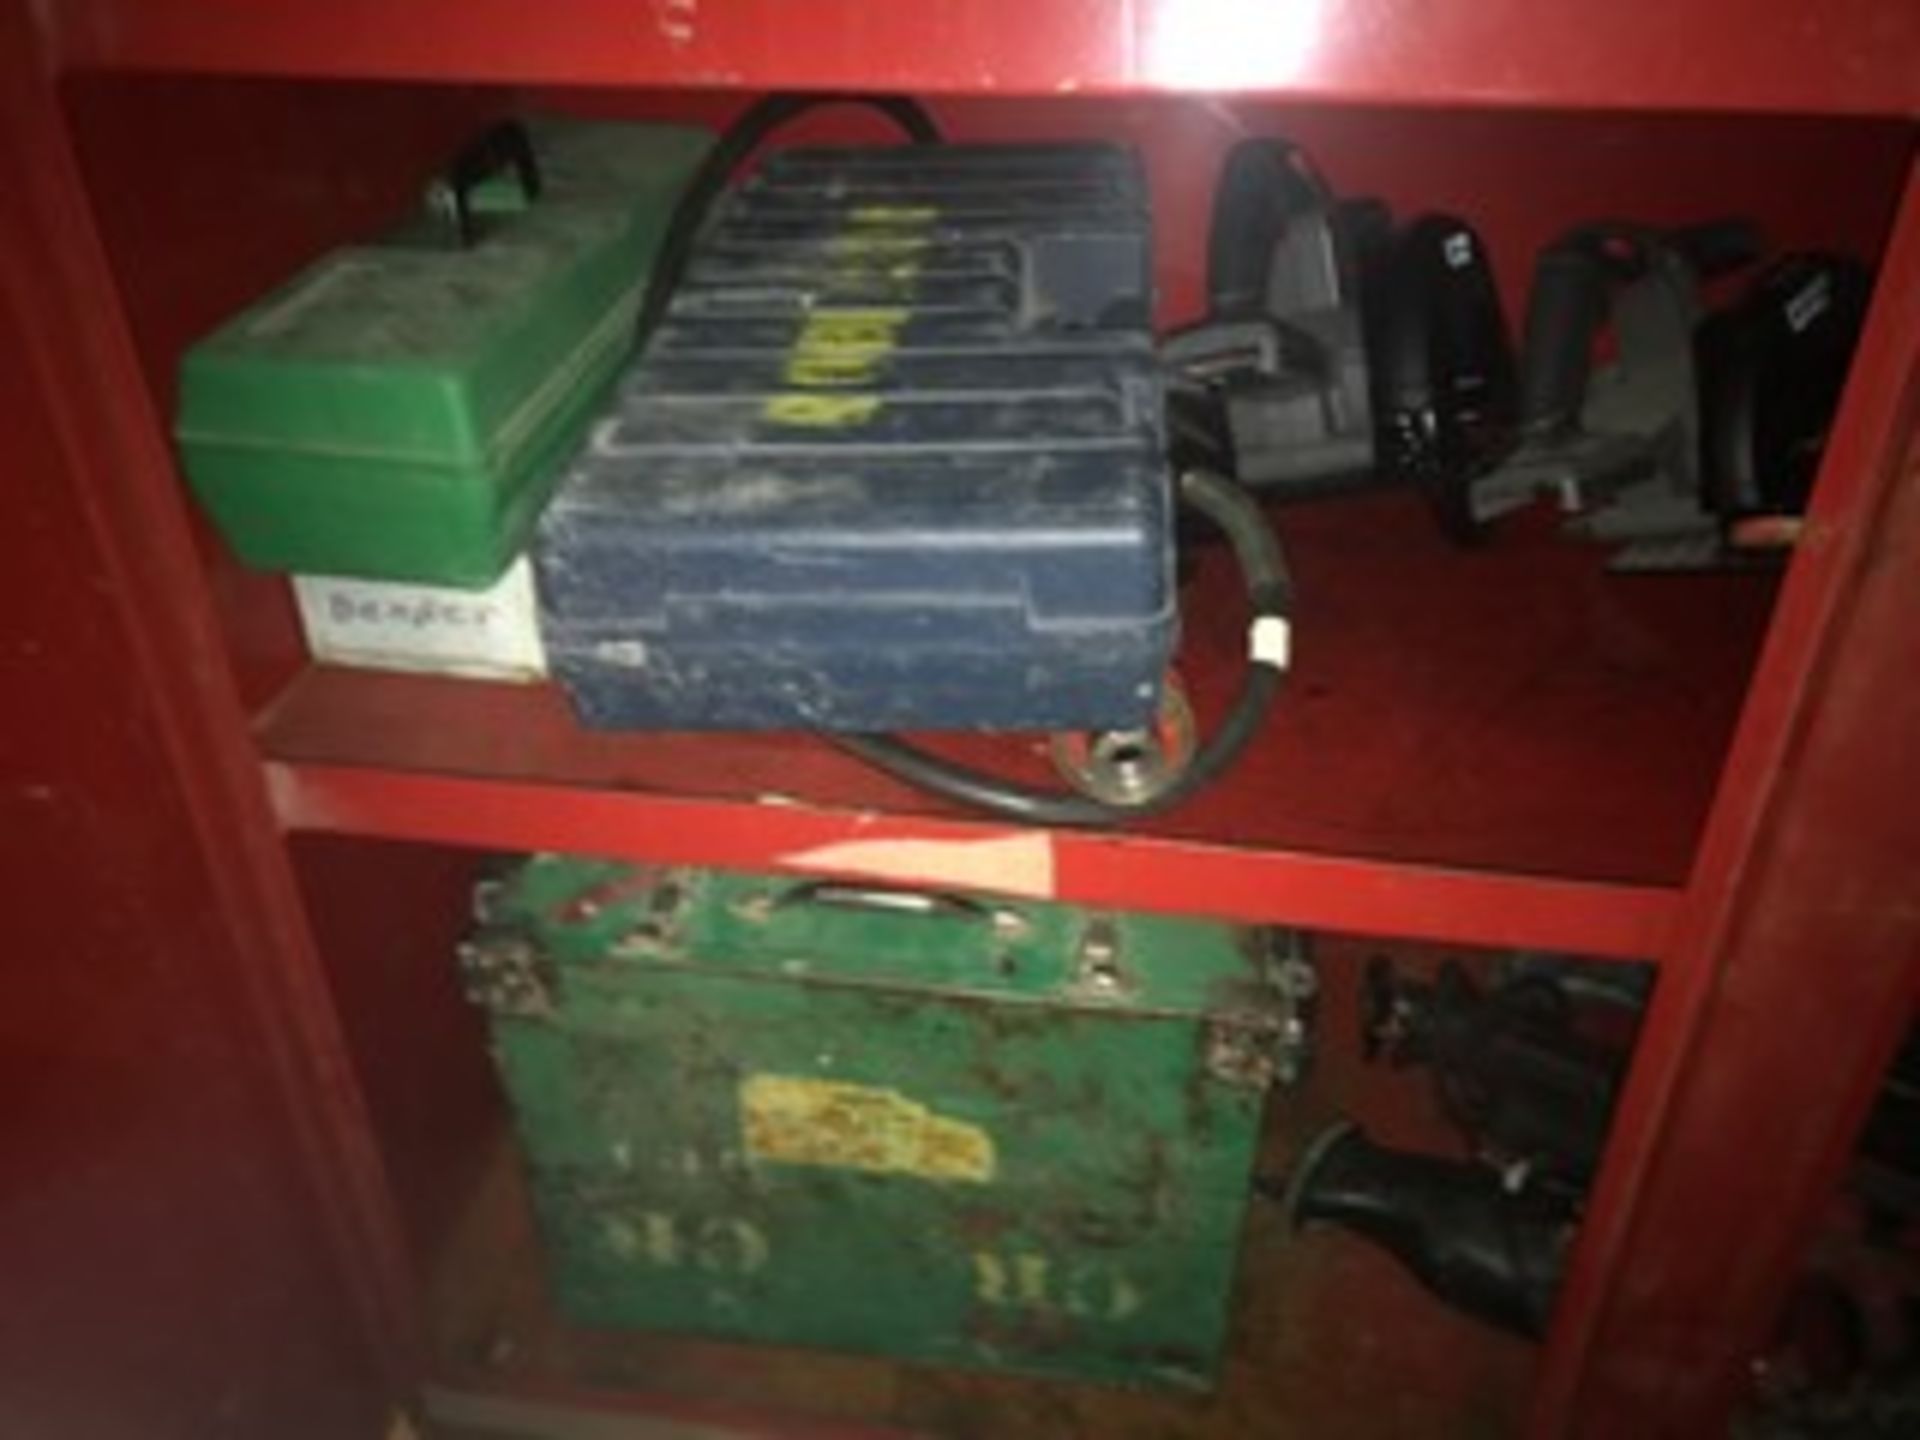 2-DOOR GB JOB BOX WITH CONTENTS -RATCHETING KNOCKOUT SETS, HILTI & RAMSET POWDER FASTENING GUNS - Image 6 of 6